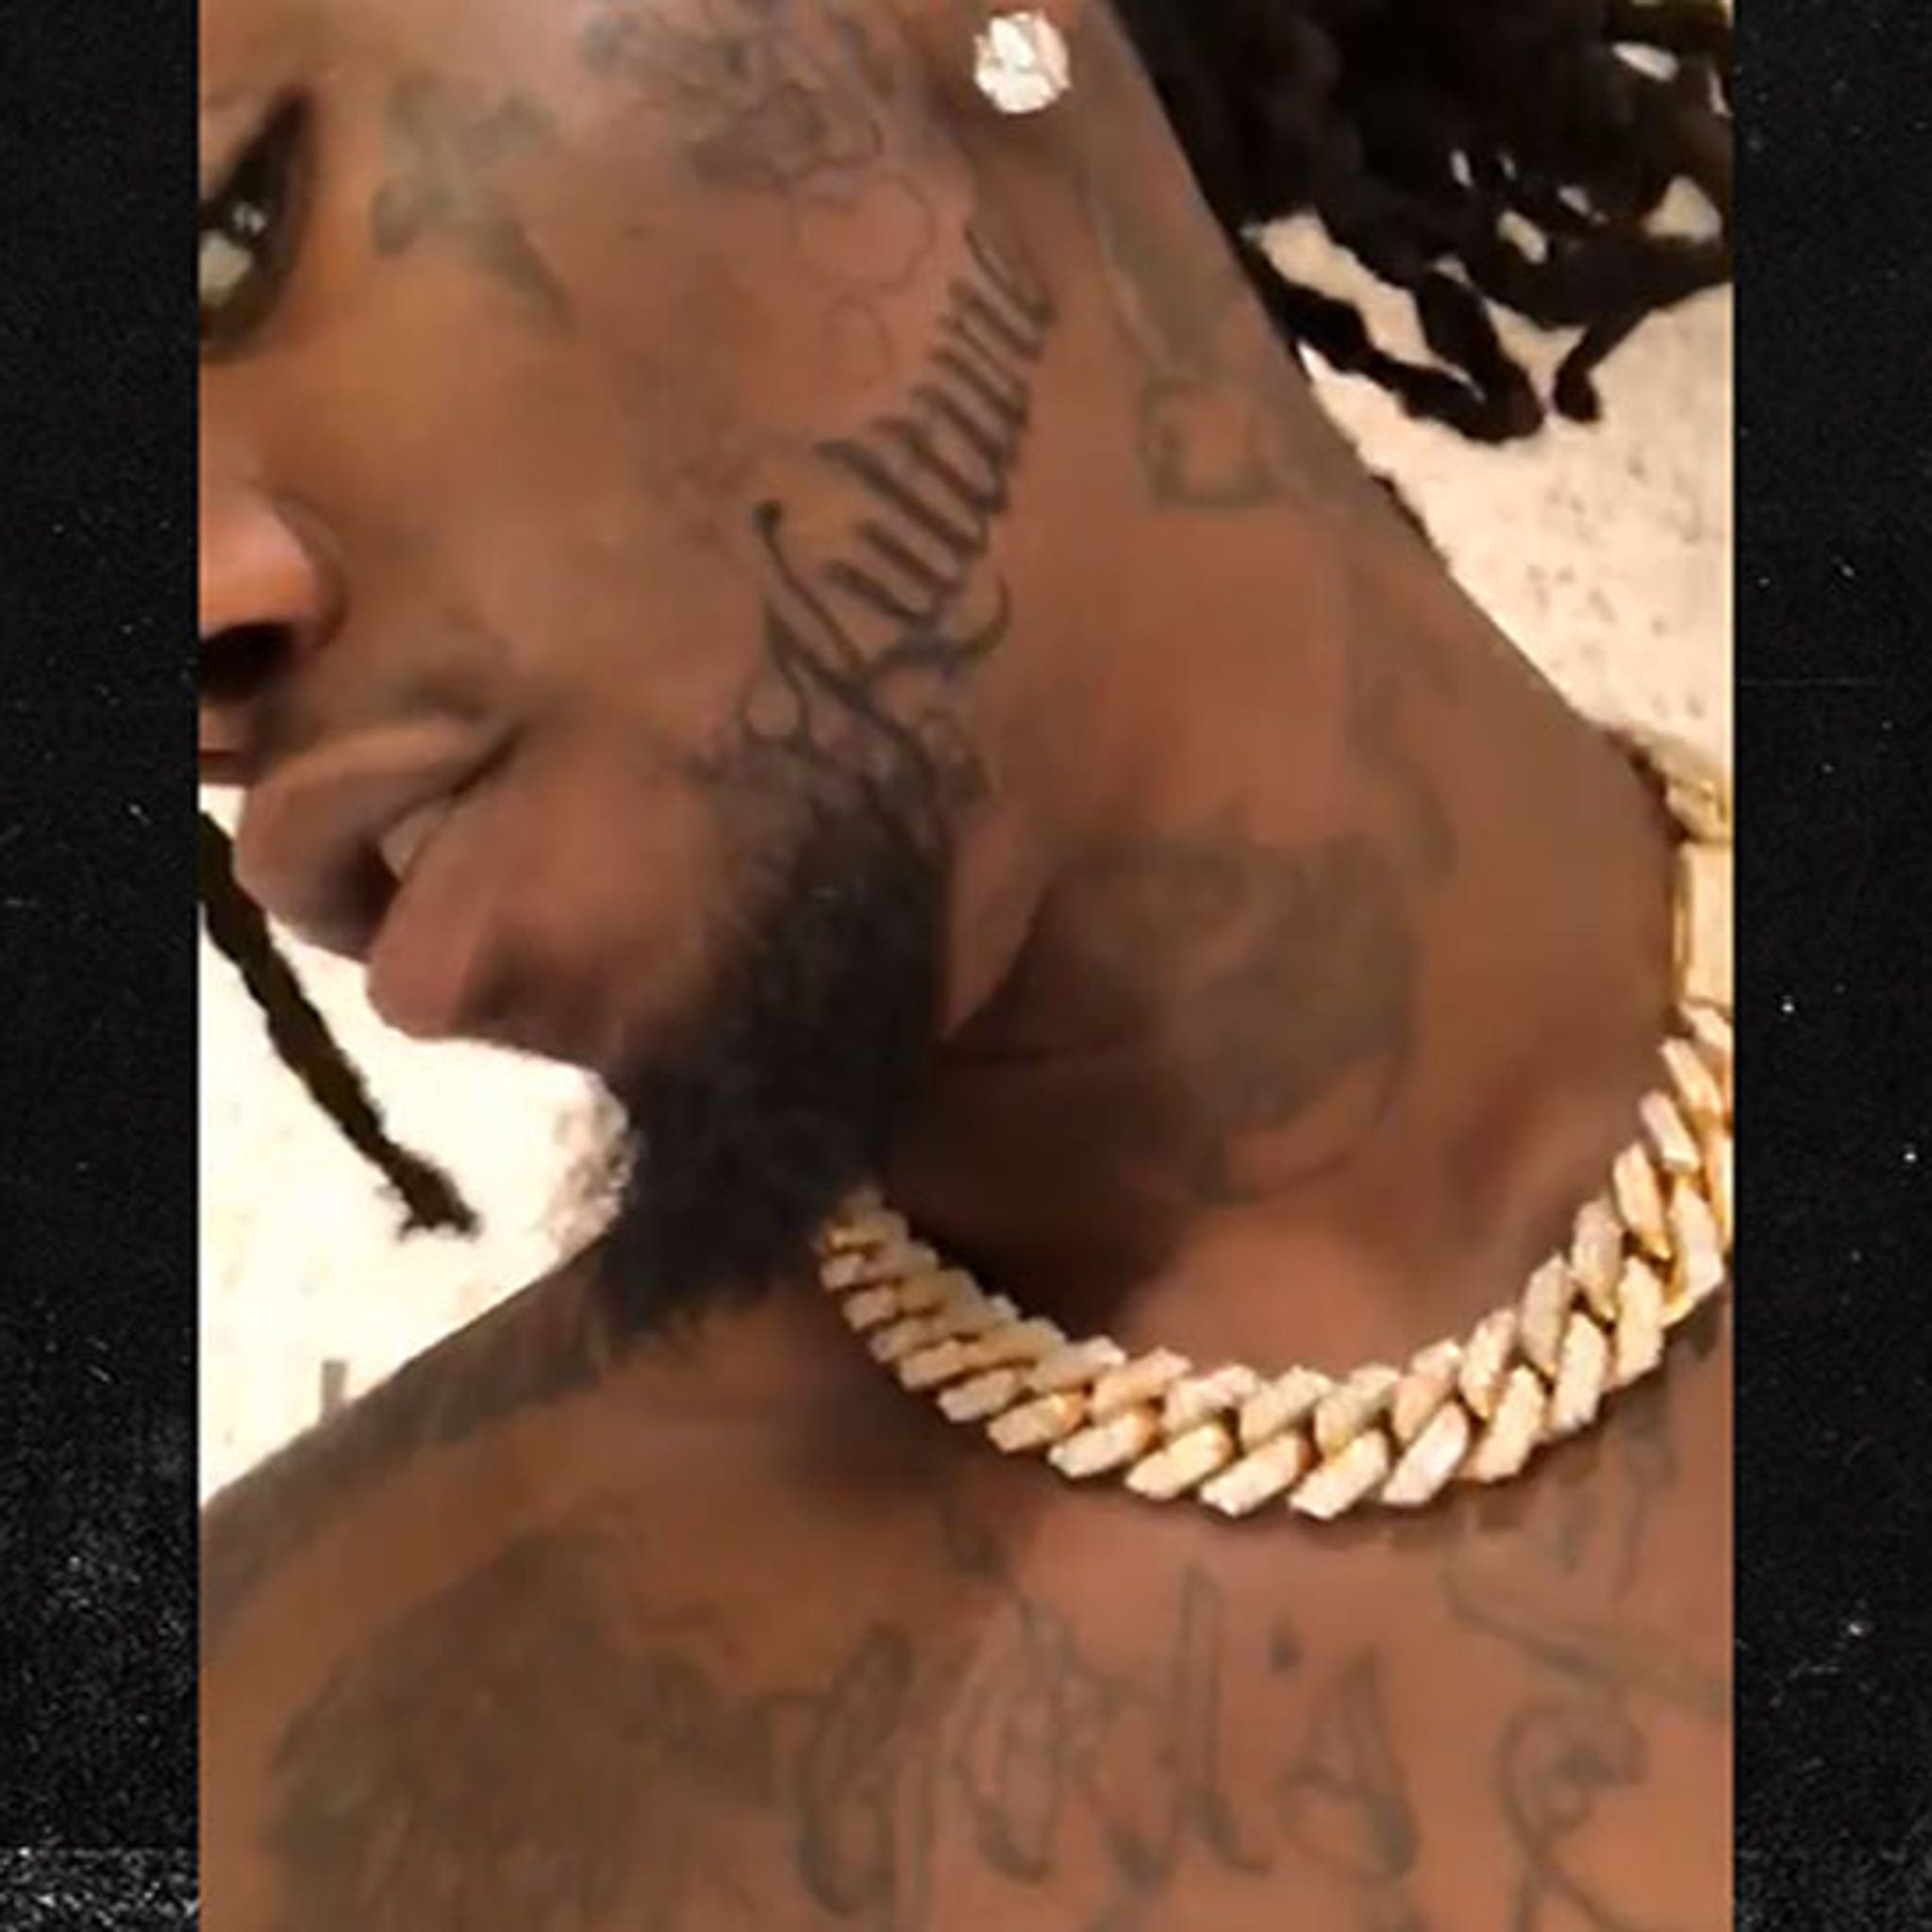 Offset Gets Giant 'Kulture' Tattoo On His Face